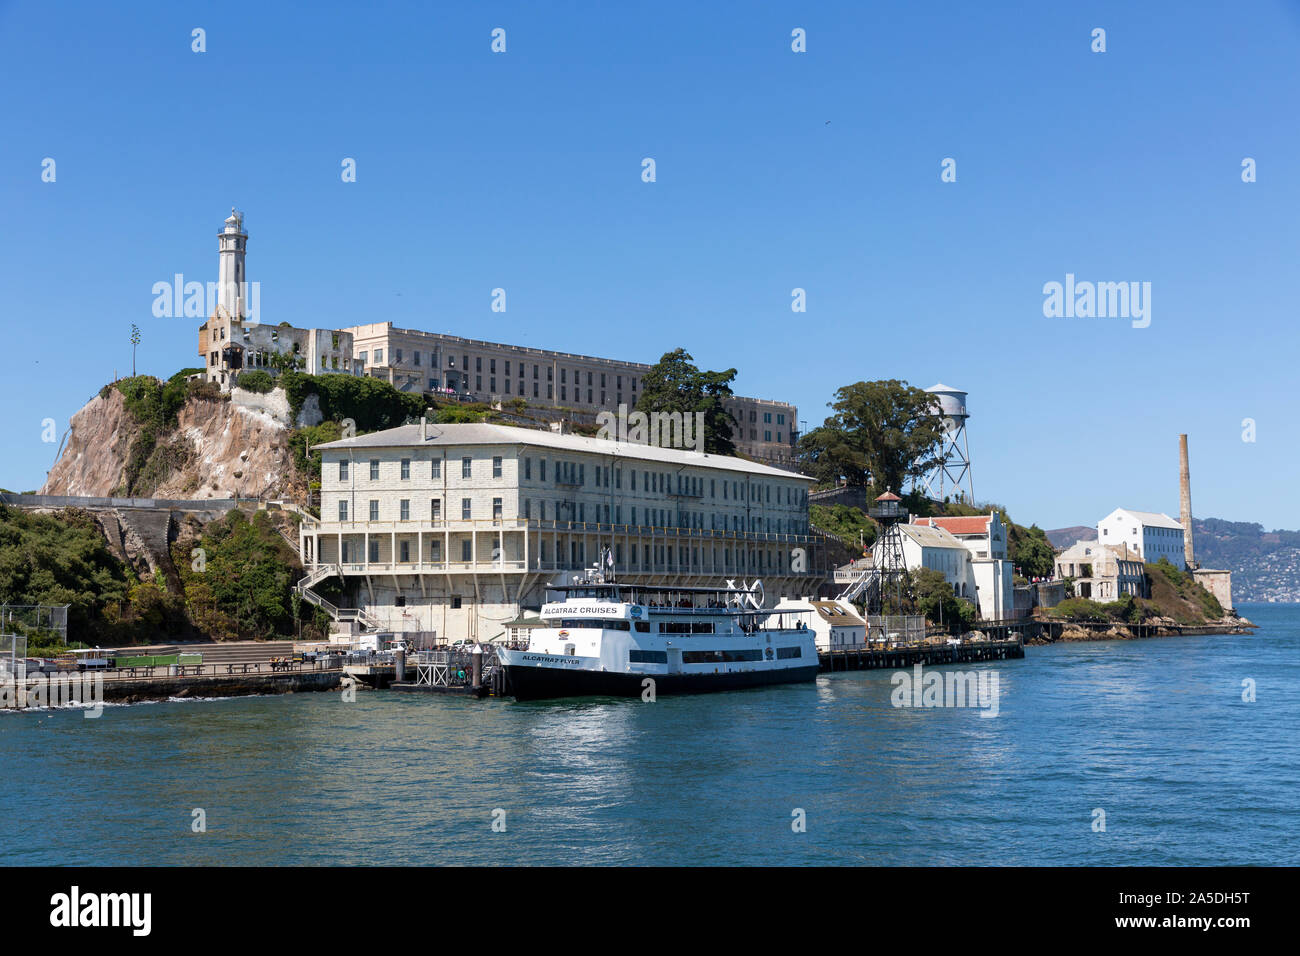 SAN FRANCISCO, USA - SEPTEMBER 8, 2019 : Wide view of Alcatraz Island and prison with an Alcatraz Cruise boat moored at the dock. Stock Photo